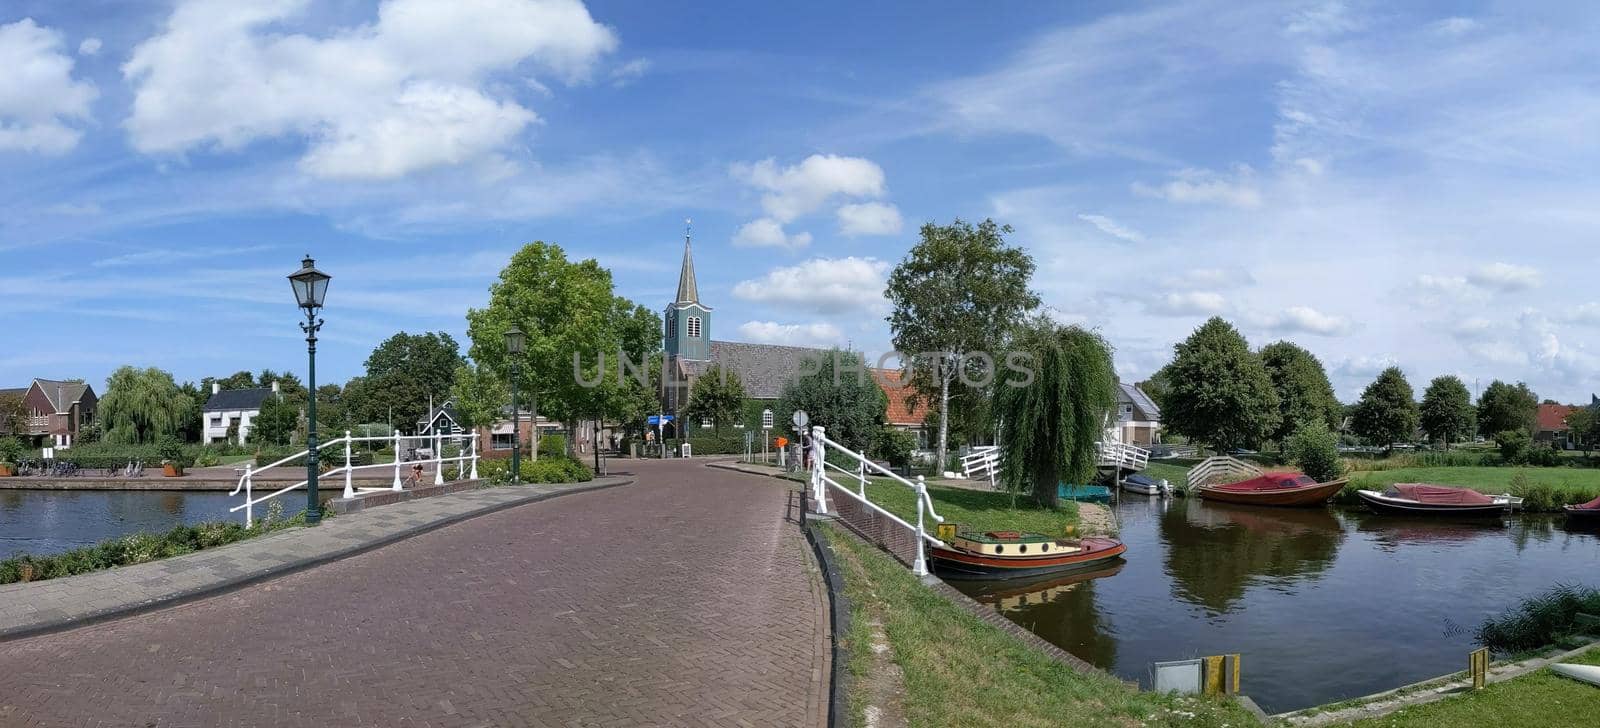 Panorama from the town Oudega in Friesland The Netherlands